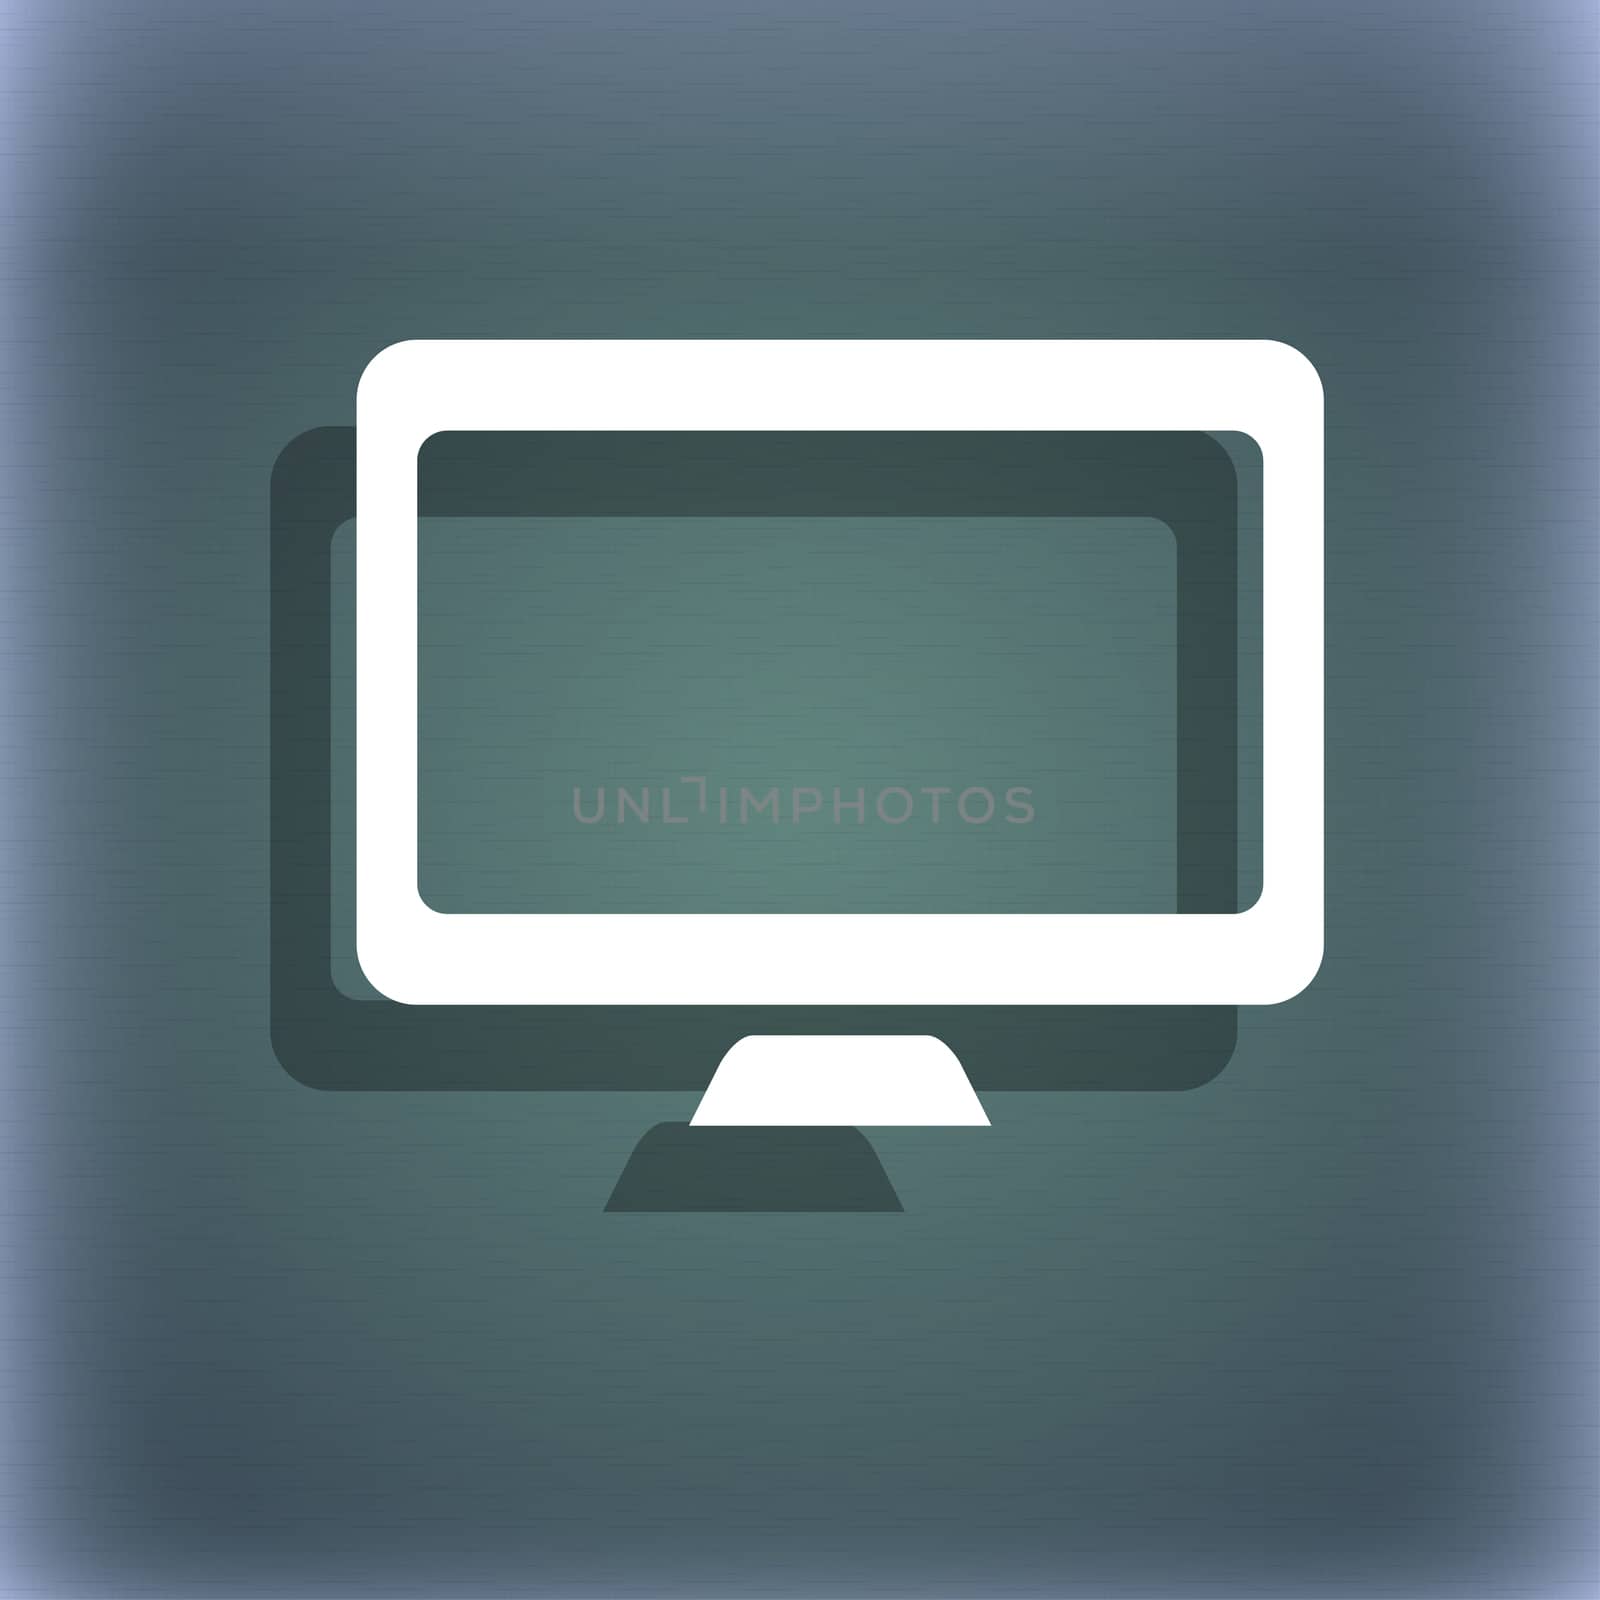 Computer widescreen monitor icon symbol on the blue-green abstract background with shadow and space for your text.  by serhii_lohvyniuk